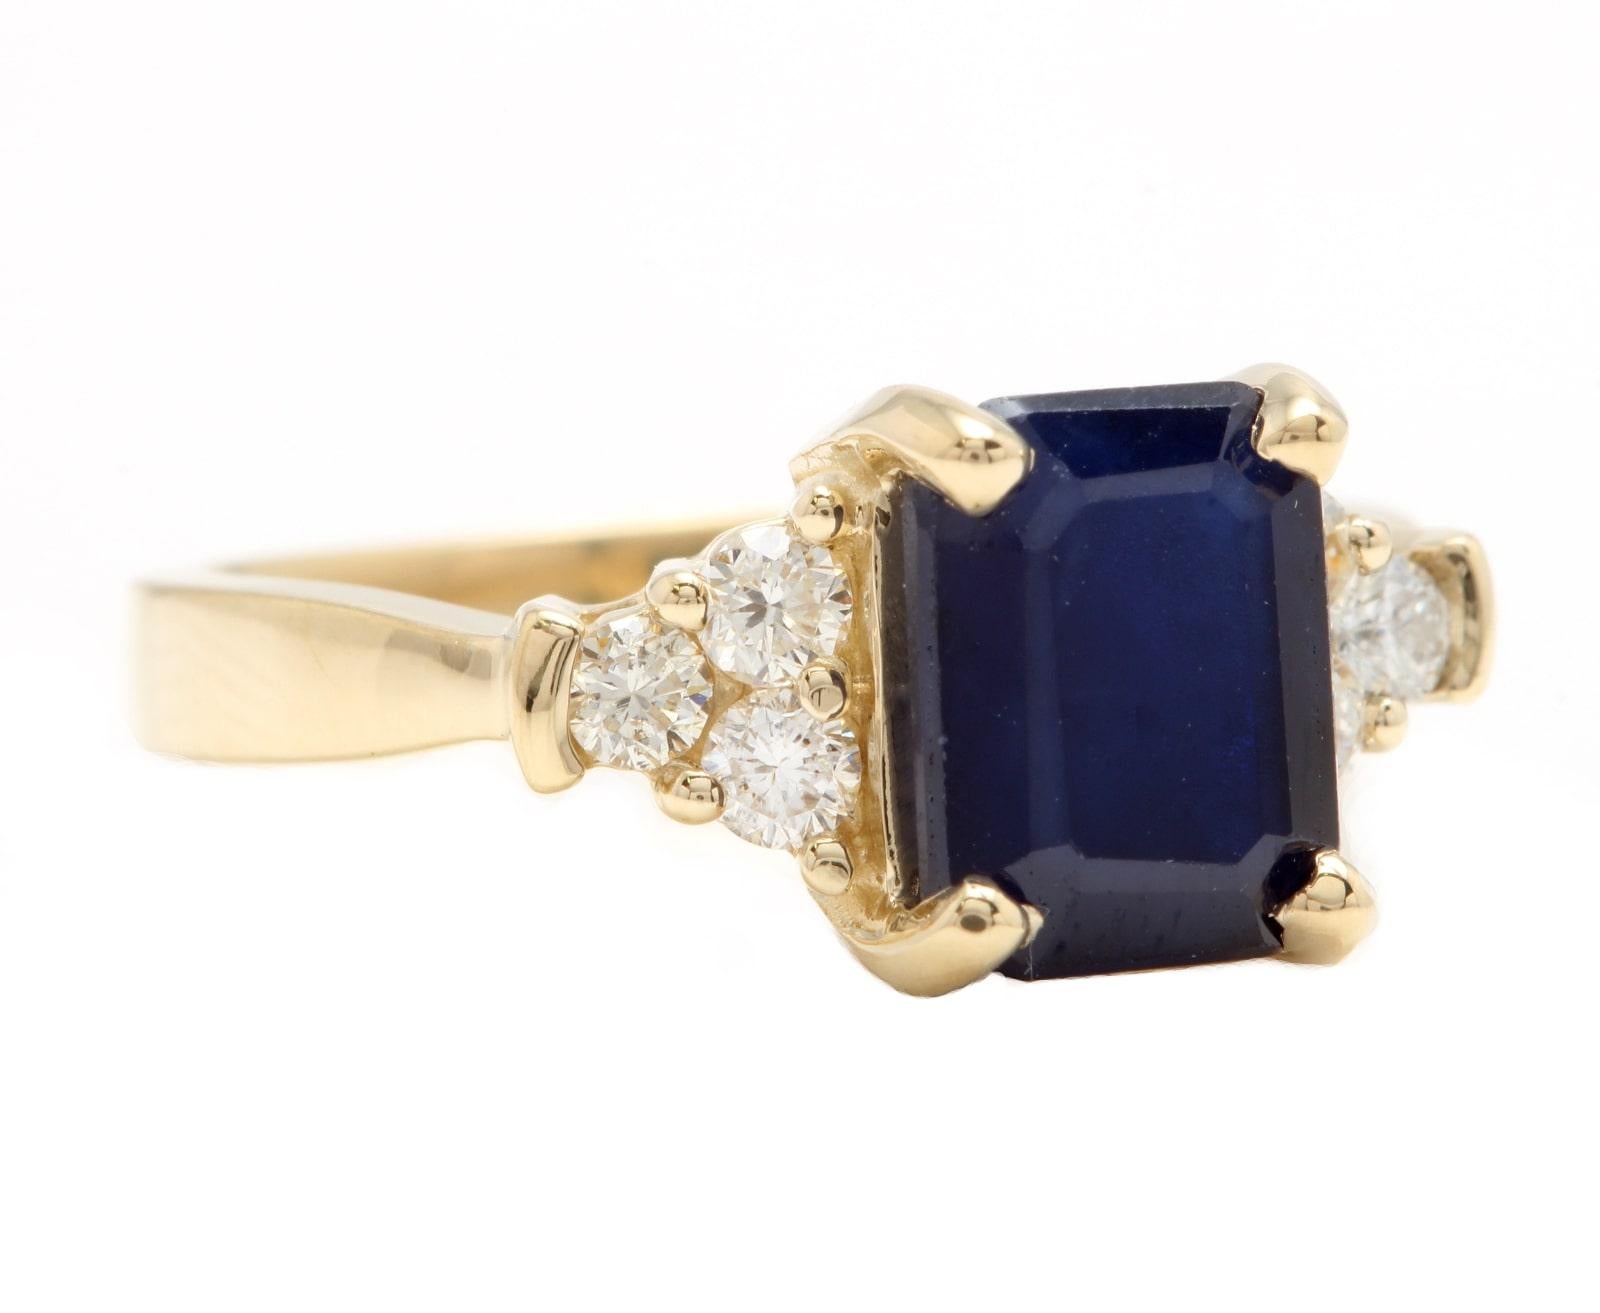 3.85 Carats Impressive Natural Sapphire and Natural Diamond 14K Yellow Gold Ring

Stamped: 14K

Suggested Replacement Value: $4,500.00

Total Sapphire Weight is: Approx. 3.50 Carats

Sapphire Treatment: Diffusion

Sapphire Measures: Approx. 9.00 x